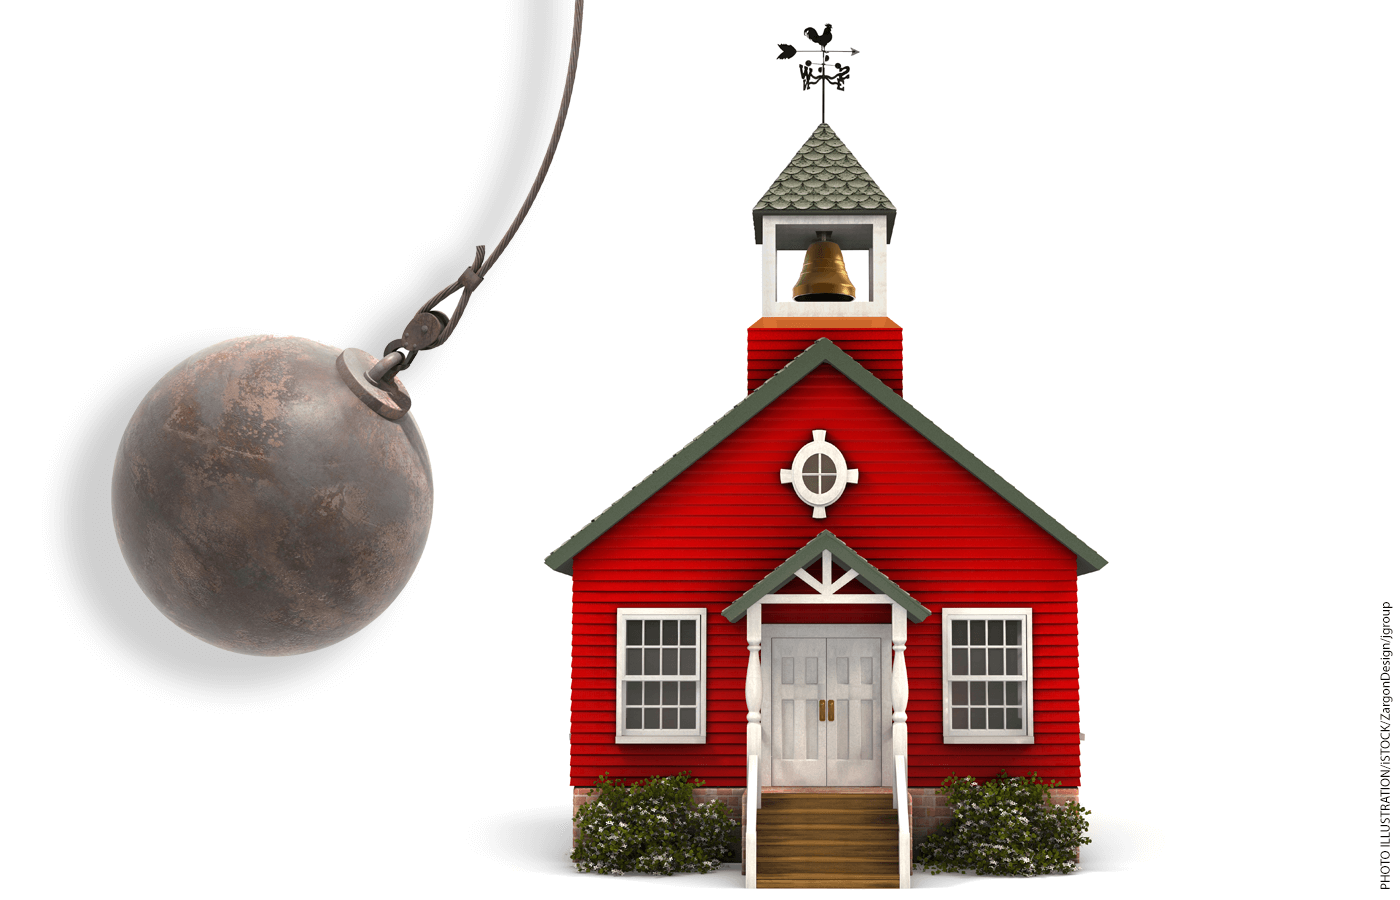 An illustration of a wrecking ball approaching a red schoolhouse